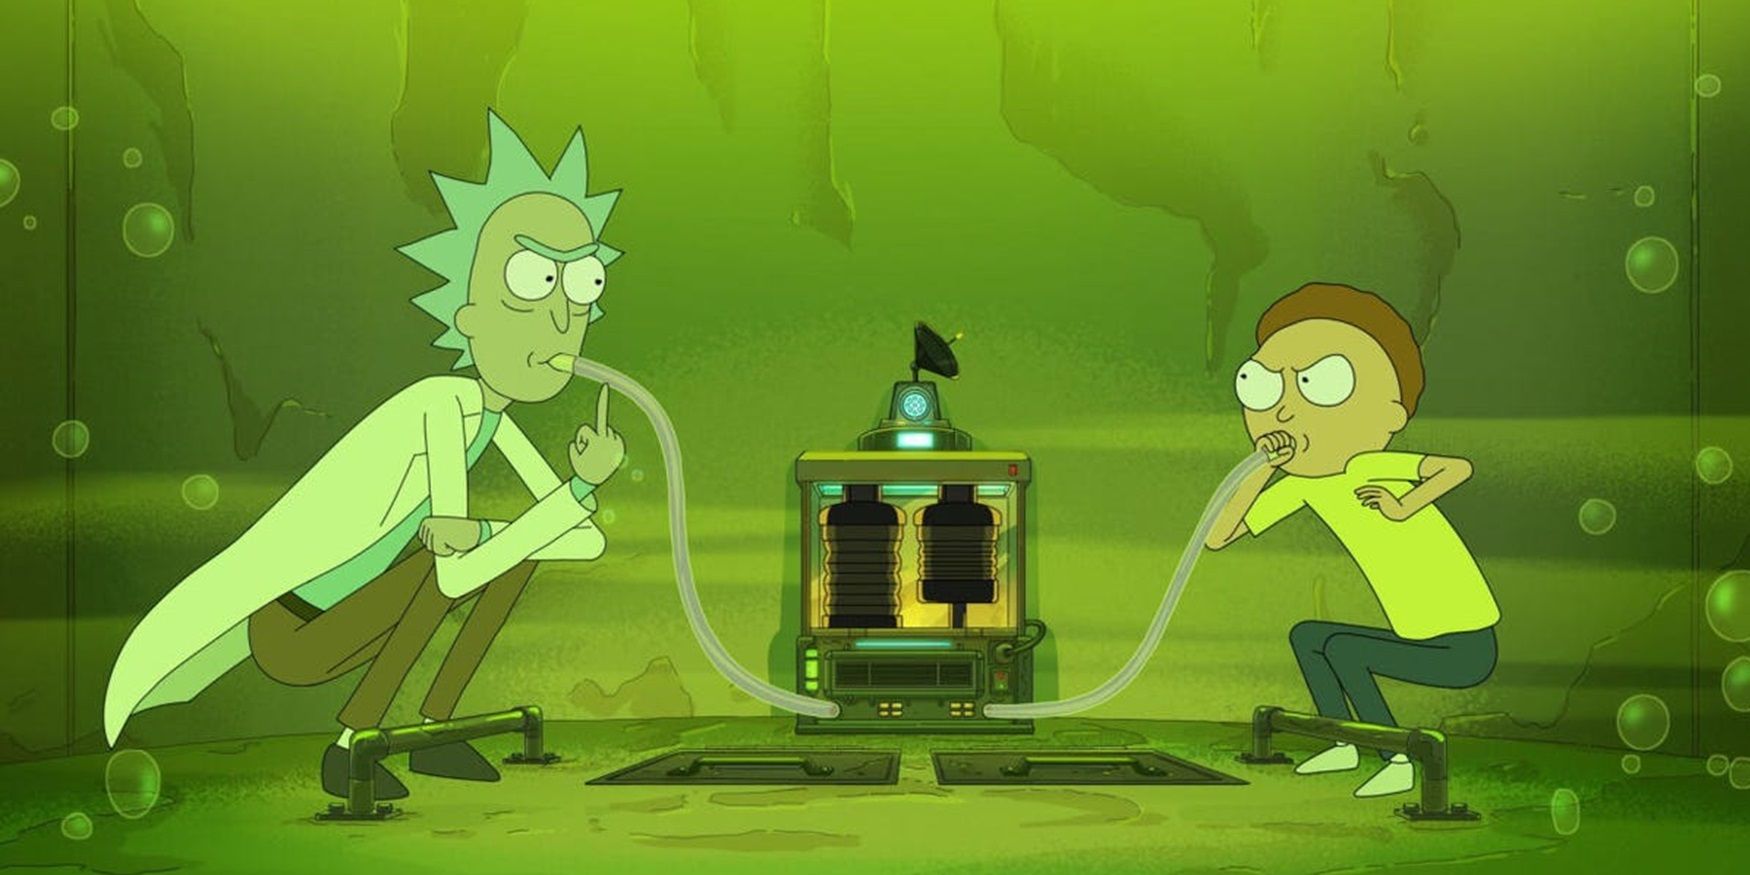 Rick and Morty hide in a vat of fake acid